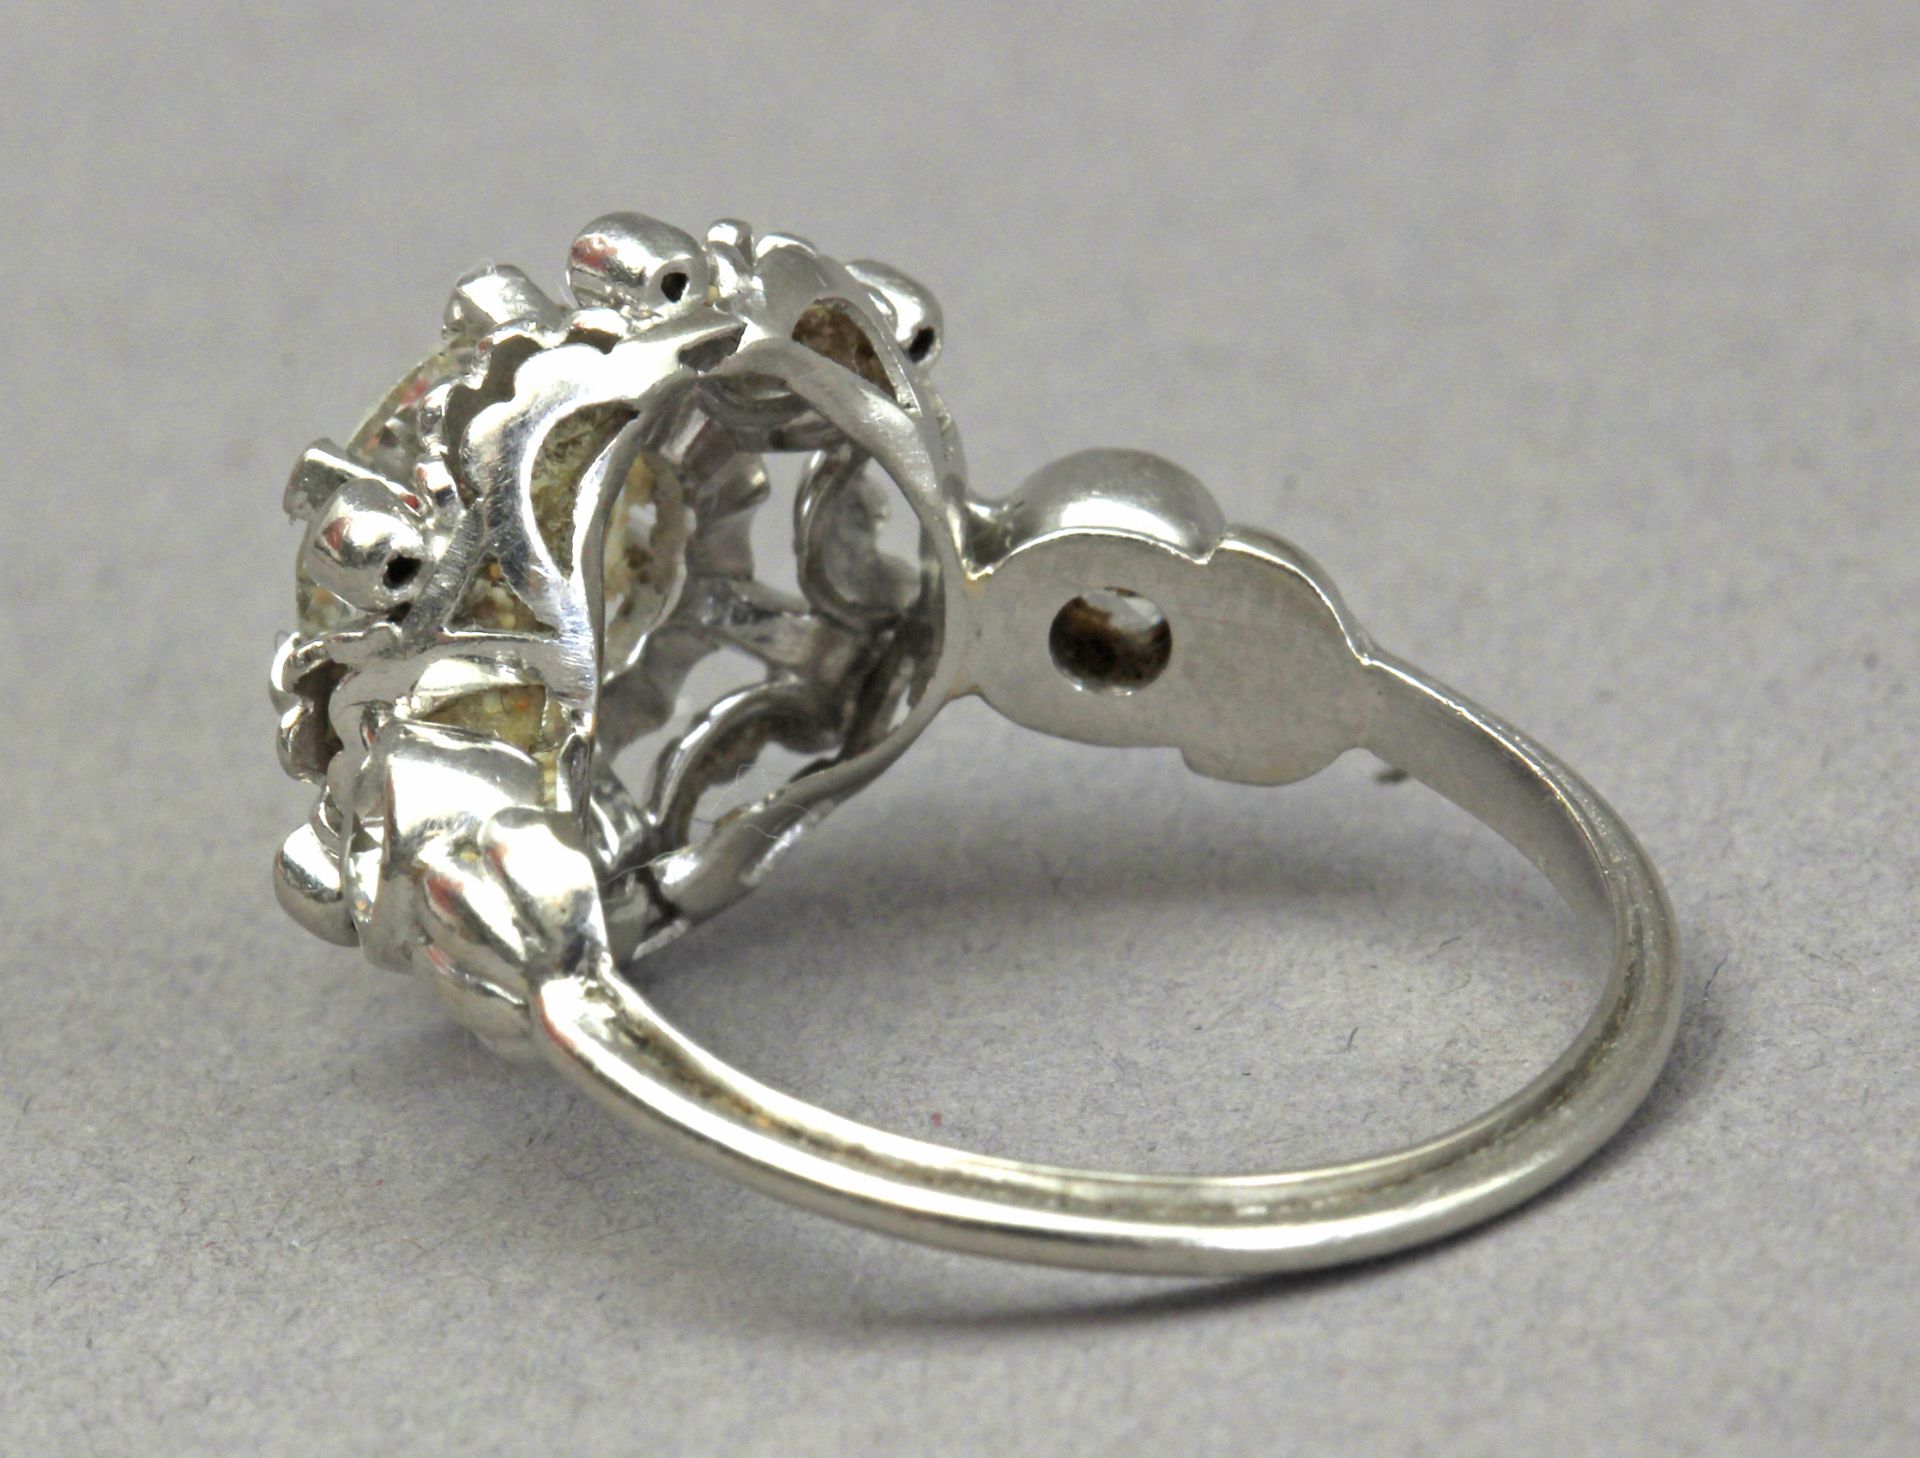 A first half of 20th century 1,75 ct. aprox. Old European cut diamond solitaire ring - Image 3 of 4